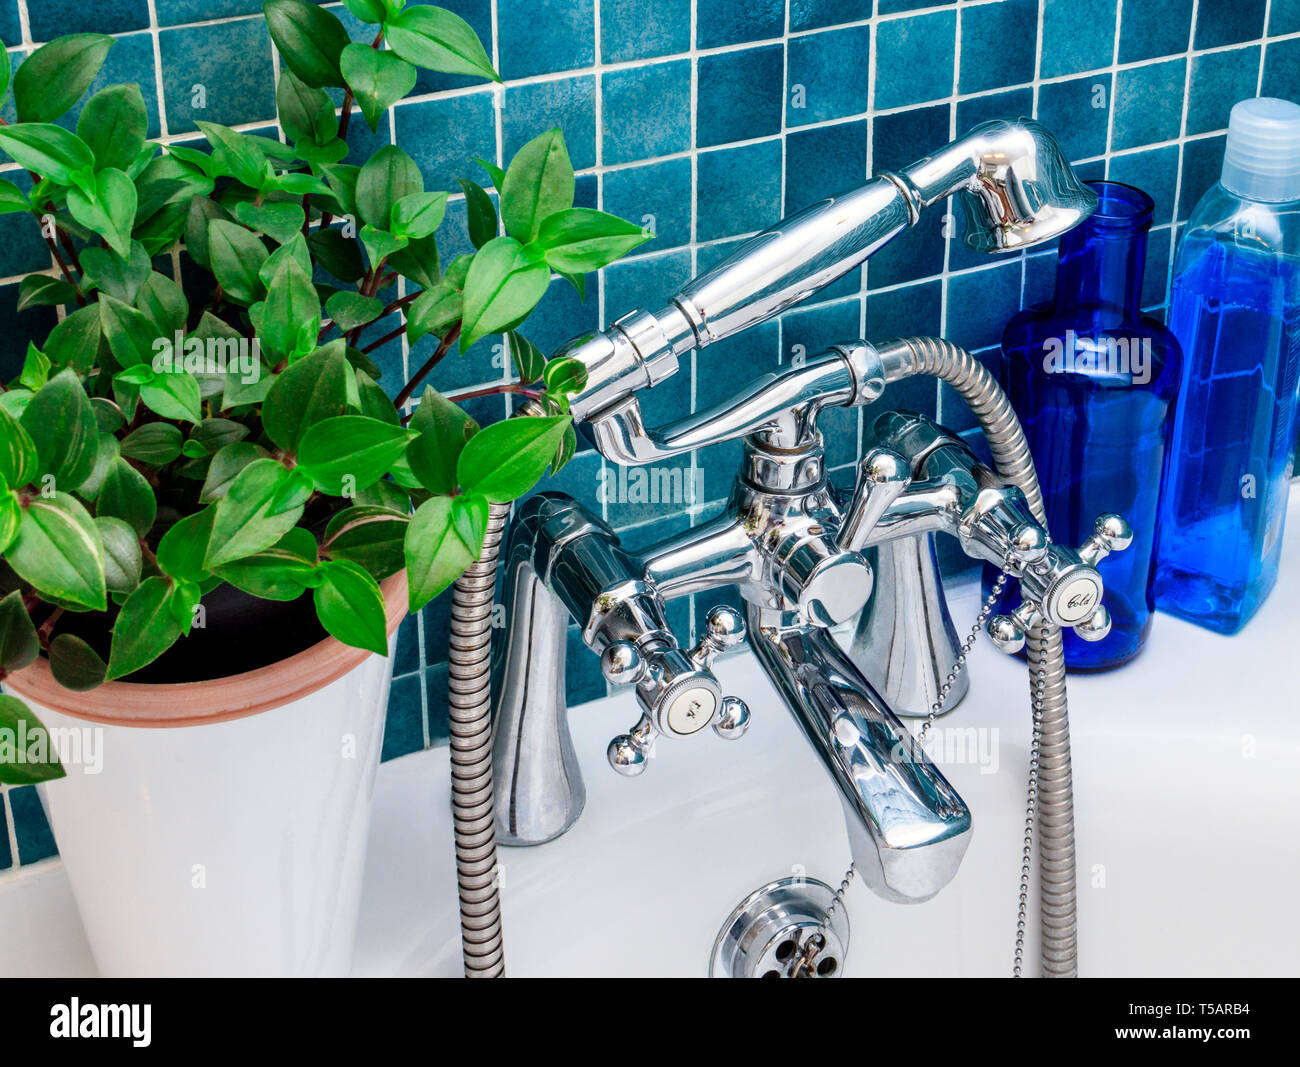 Close-up of chrome-plated mixer taps and hand-held shower head in a blue-green tiled bathroom with a foliage plant and blue bottles Stock Photo